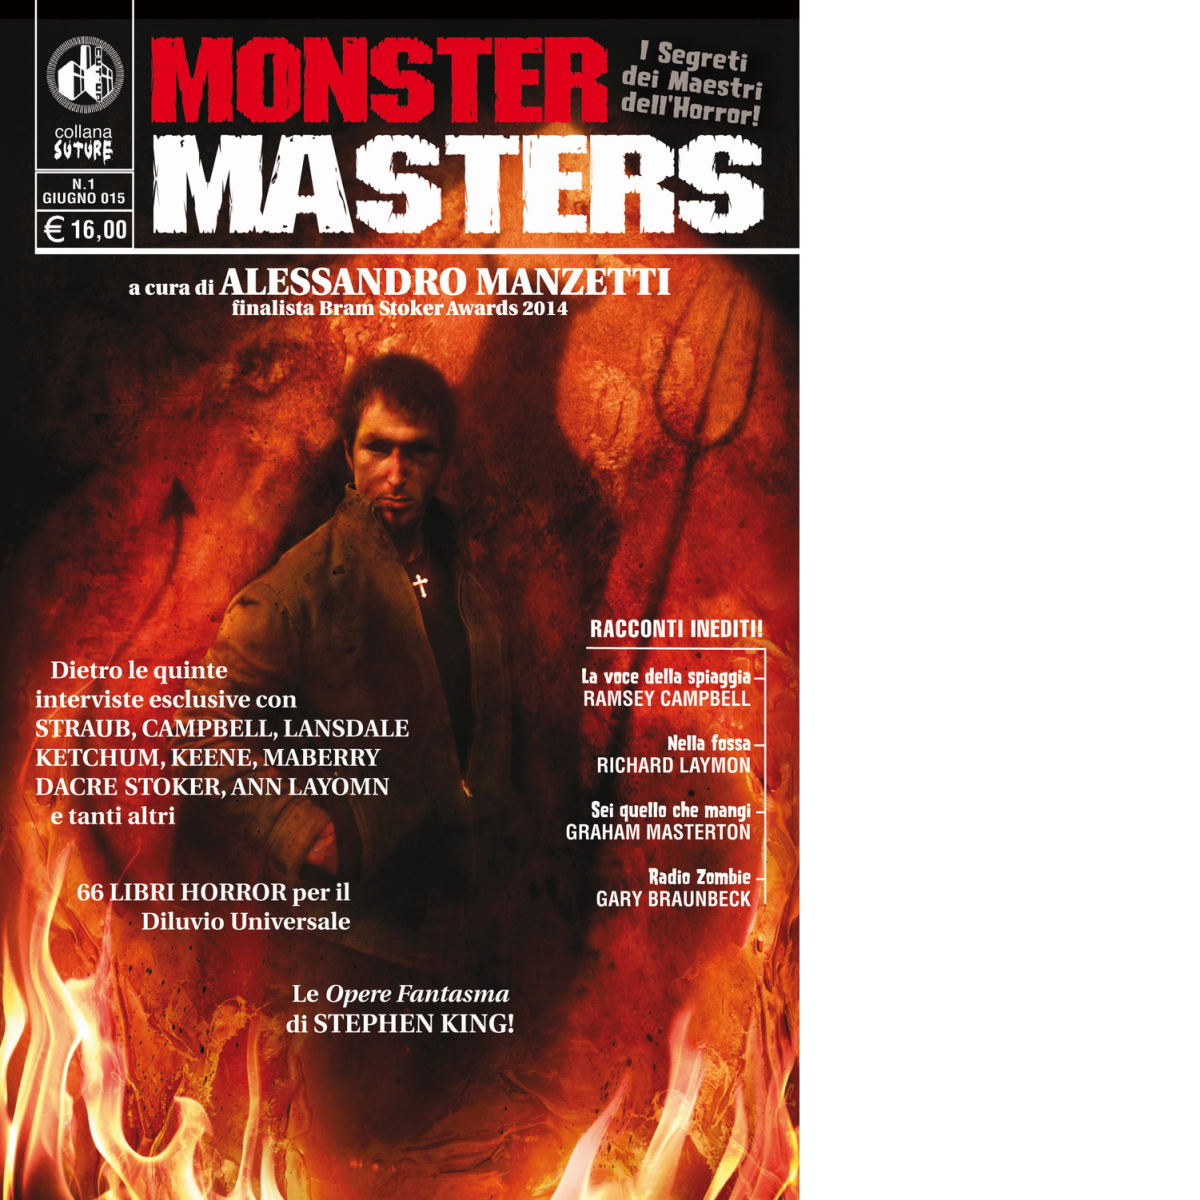 Monster masters - Ramsey Campbell - Cut-up, 2017 libro usato